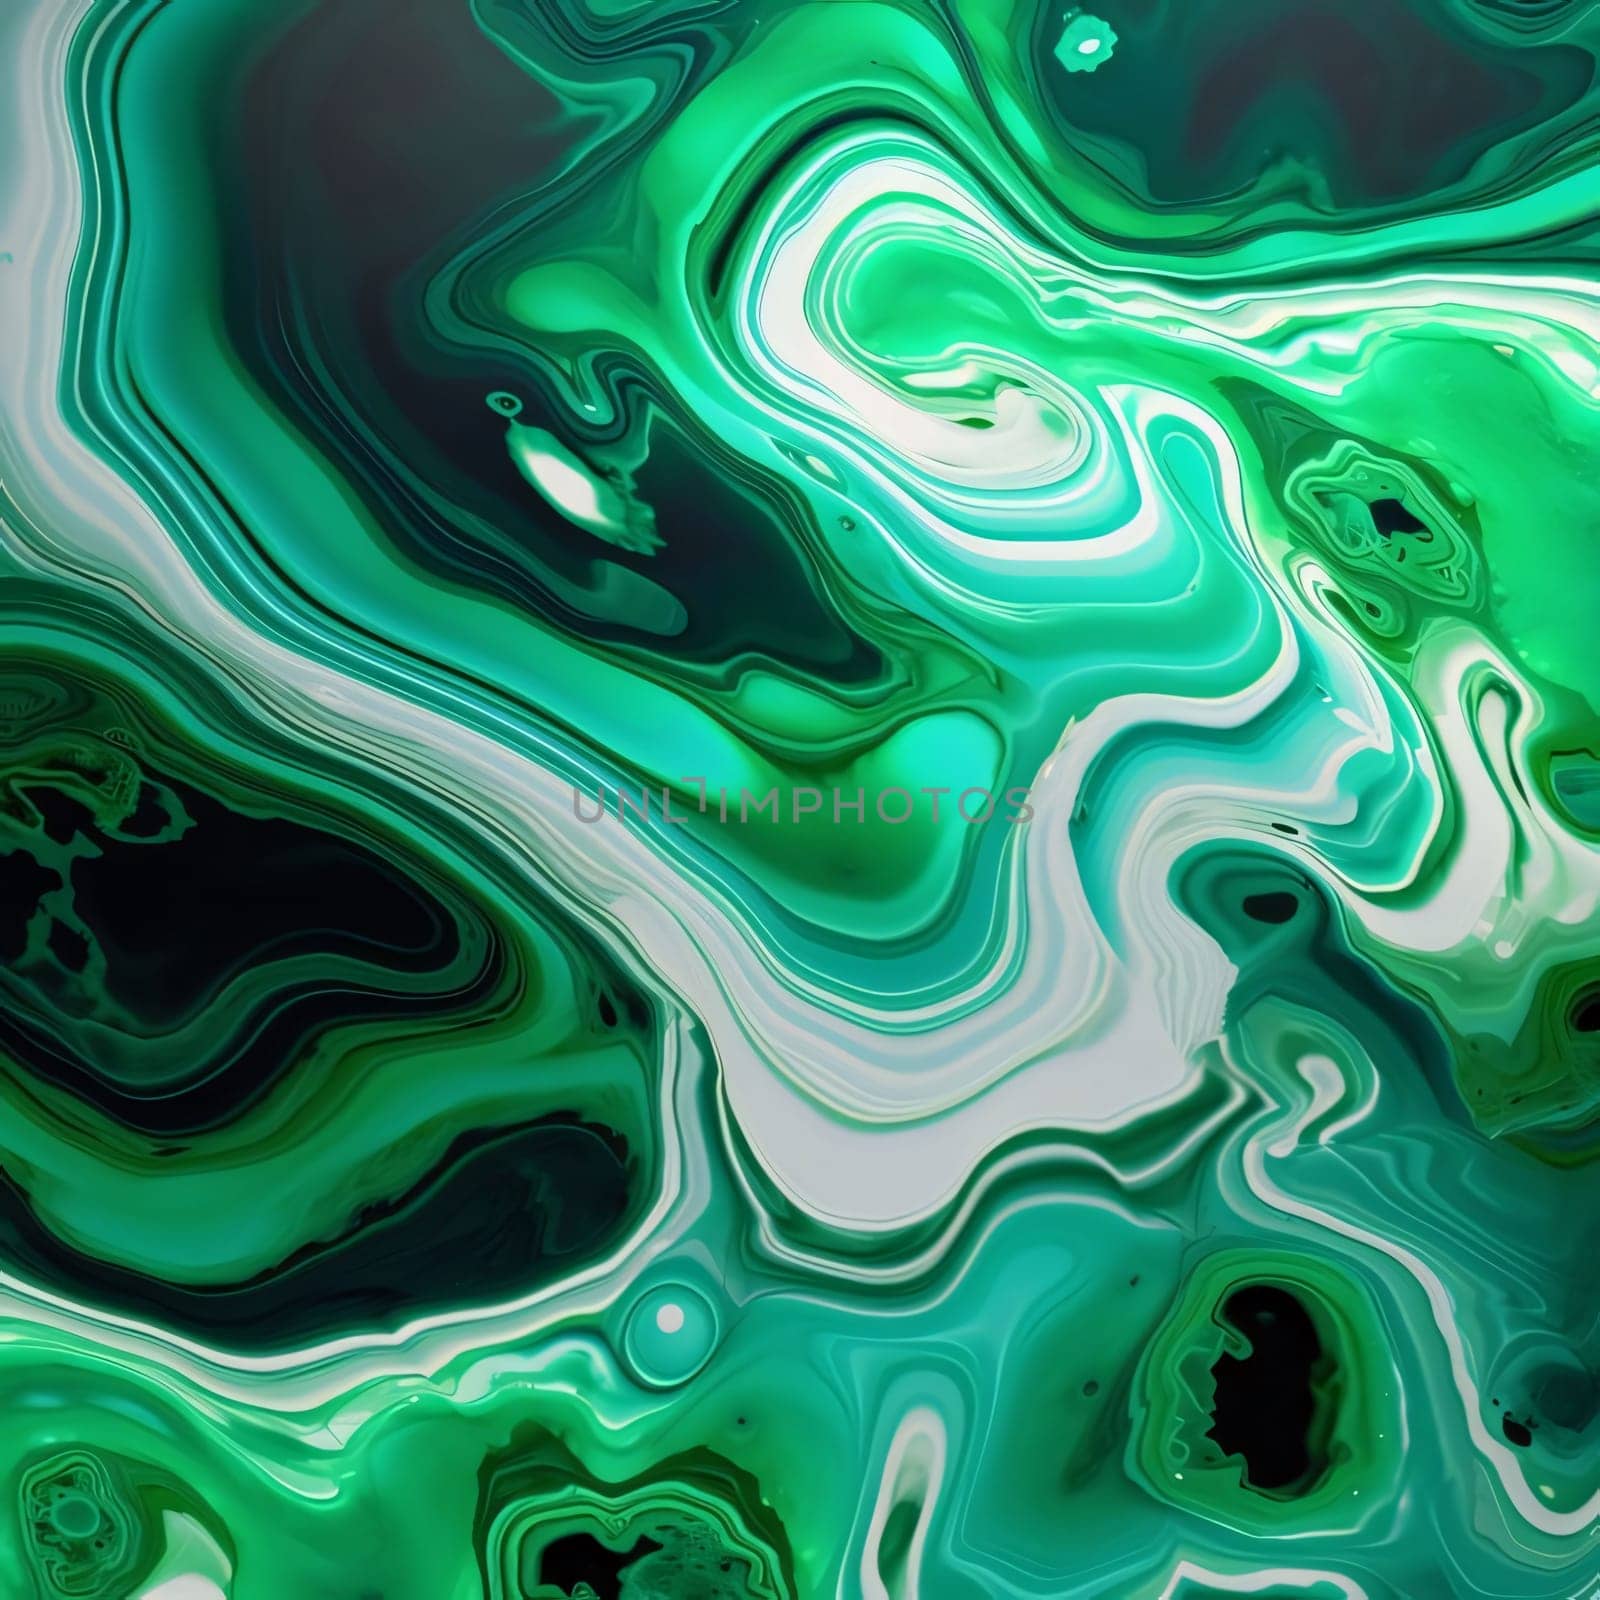 Abstract background design: Abstract background with green and turquoise marble pattern. Fantasy fractal image. Digital art. 3D rendering.